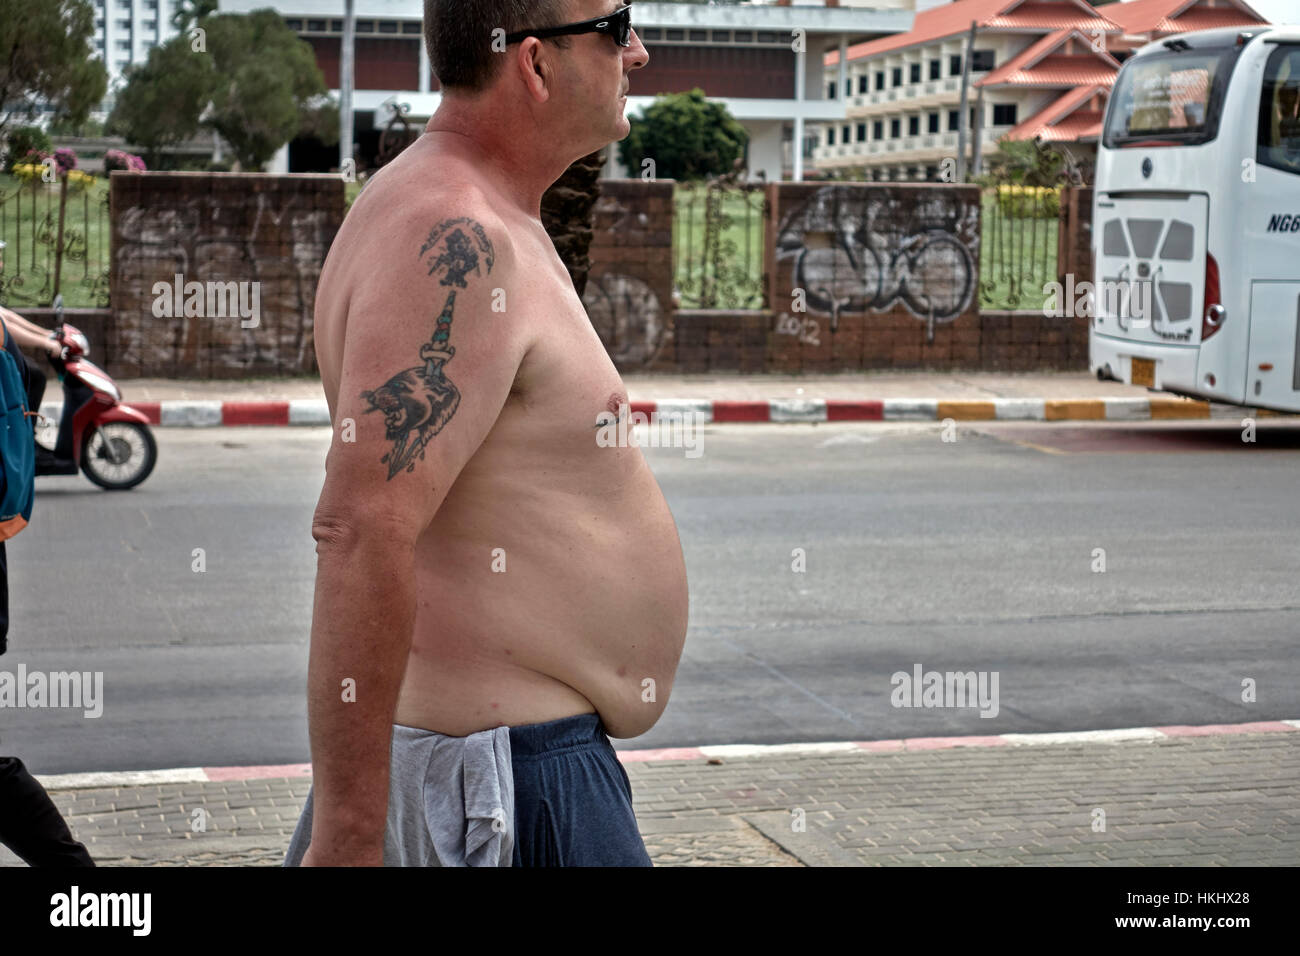 obese-shirtless-male-with-overhanging-pronounced-stomach-HKHX28.jpg